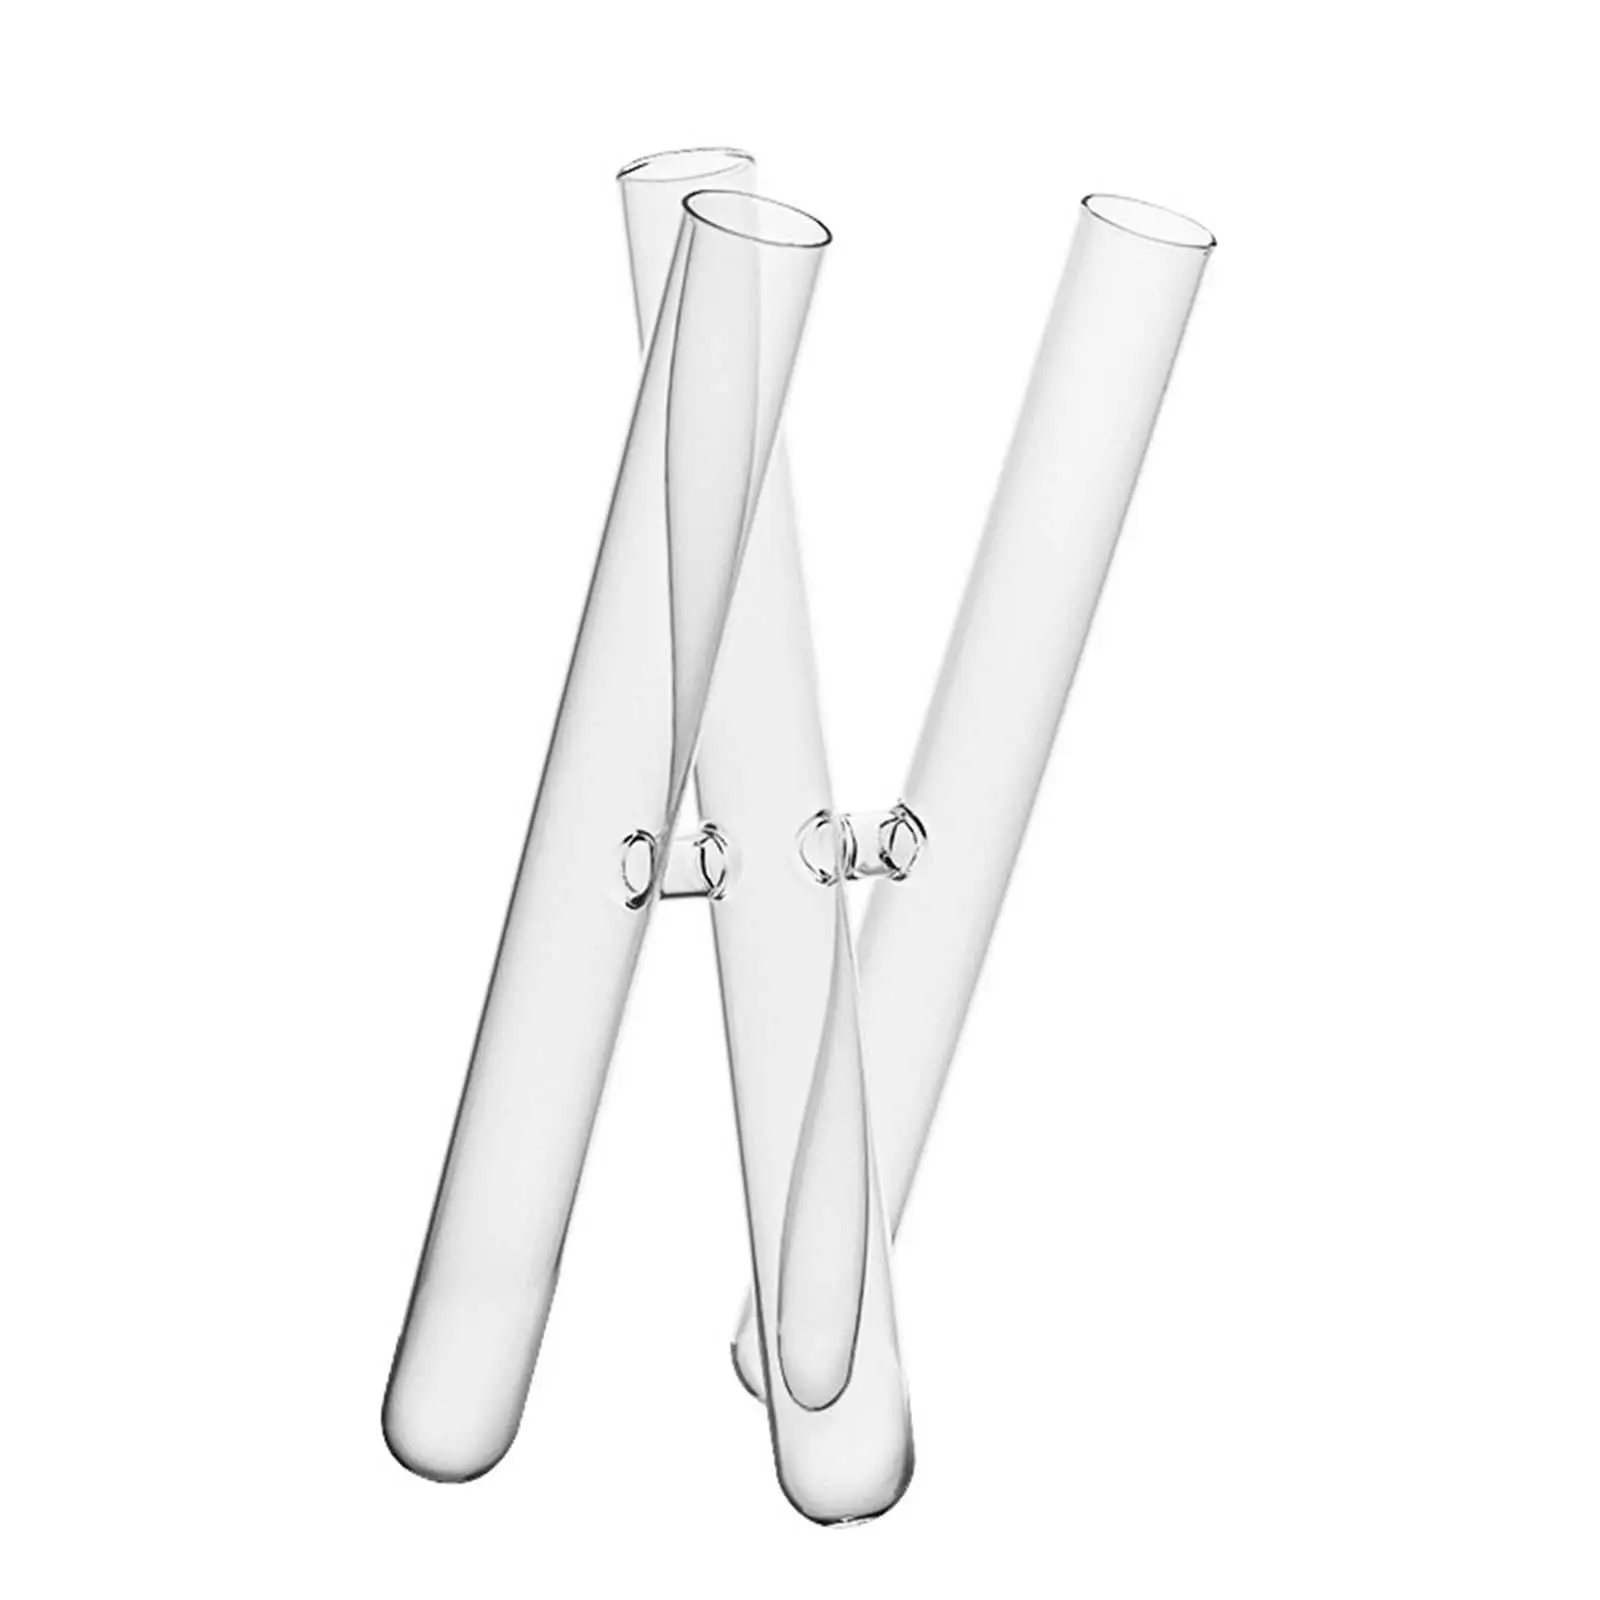 Test Tube Vases for Flowers with 3 Test Tubes Glass Fashion Planter Vase for Desk Cafe Office Party Dining Room